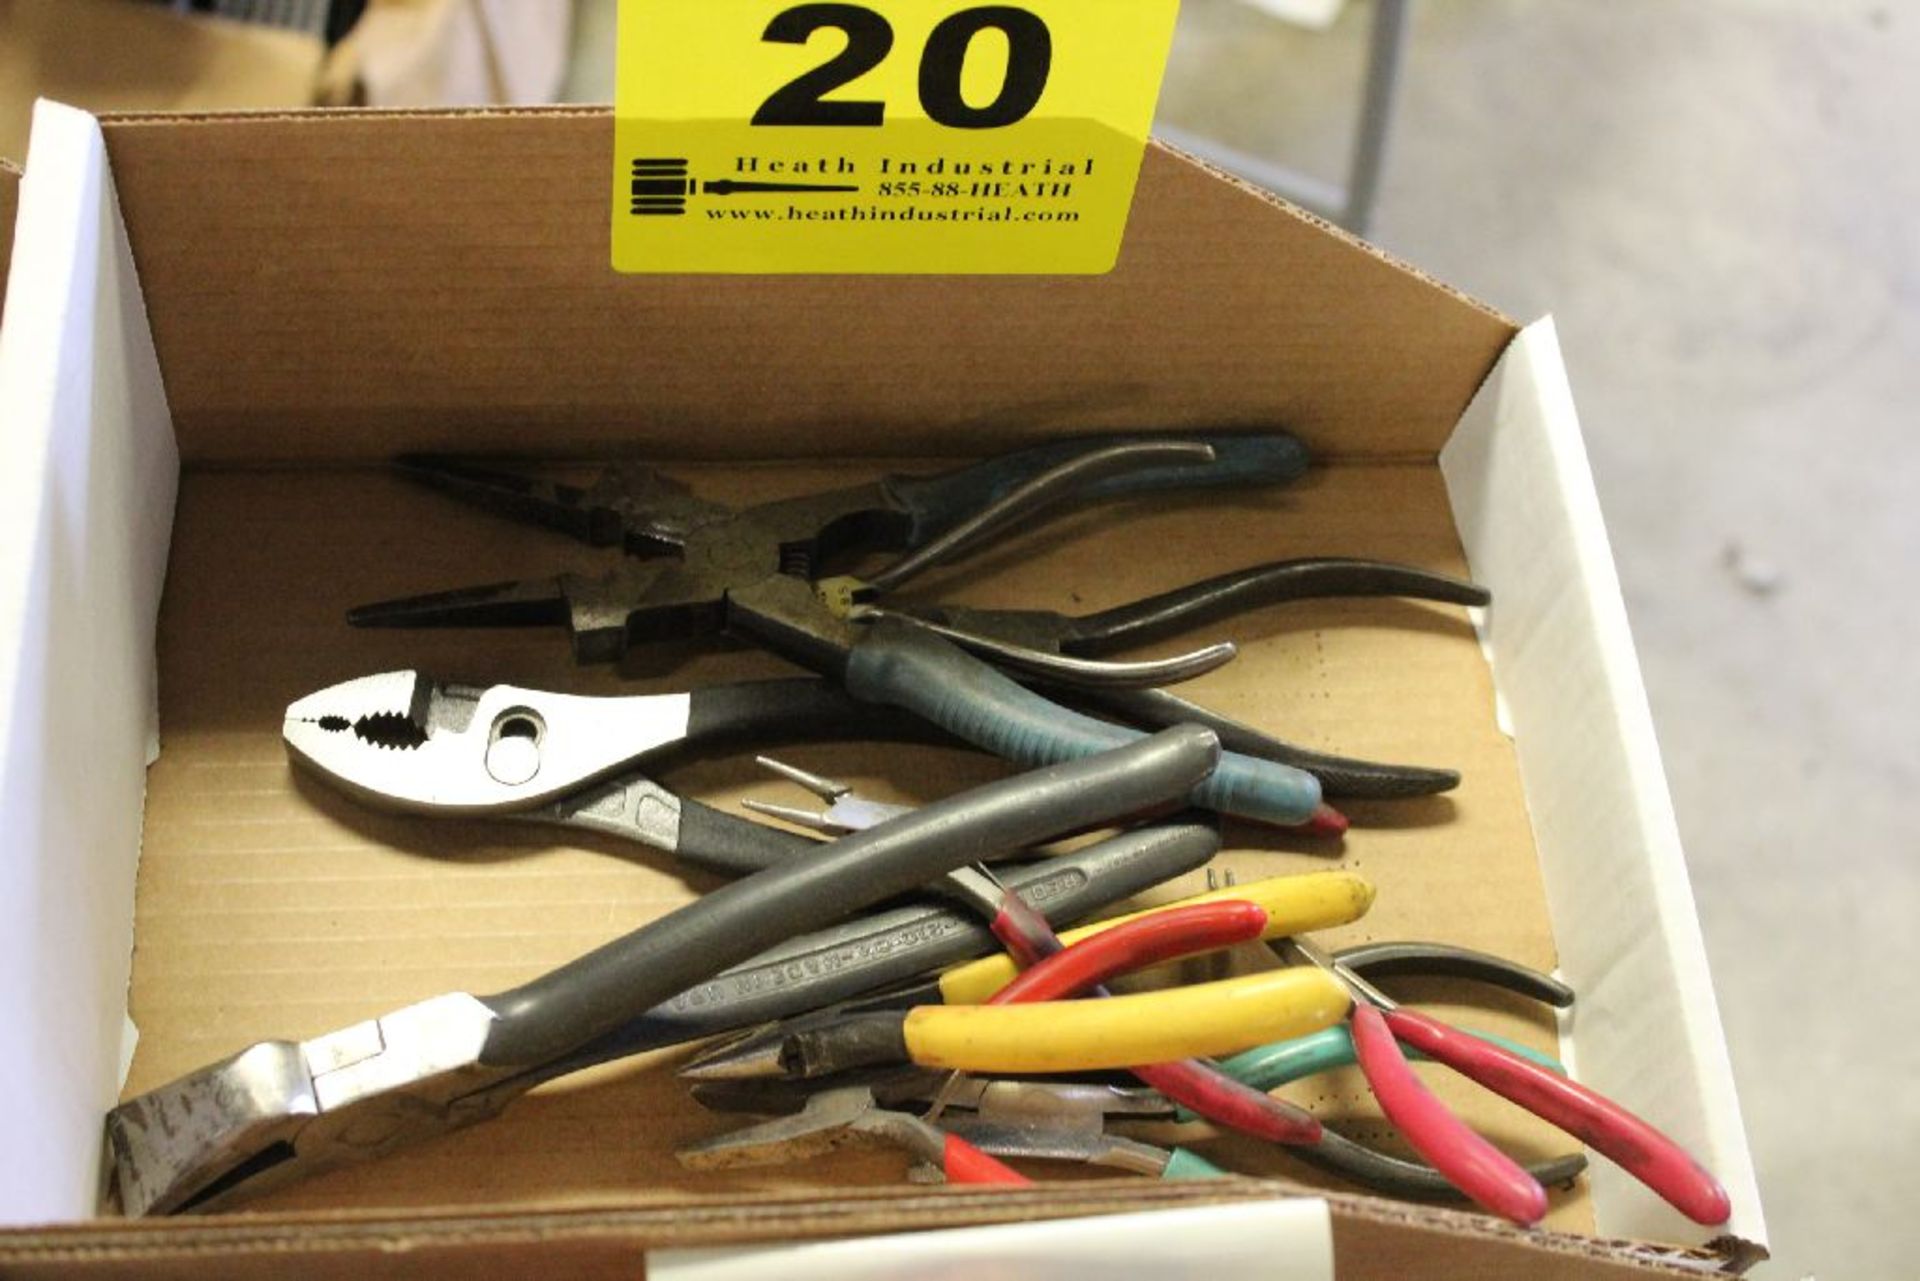 ASSORTED PLIERS IN BOX